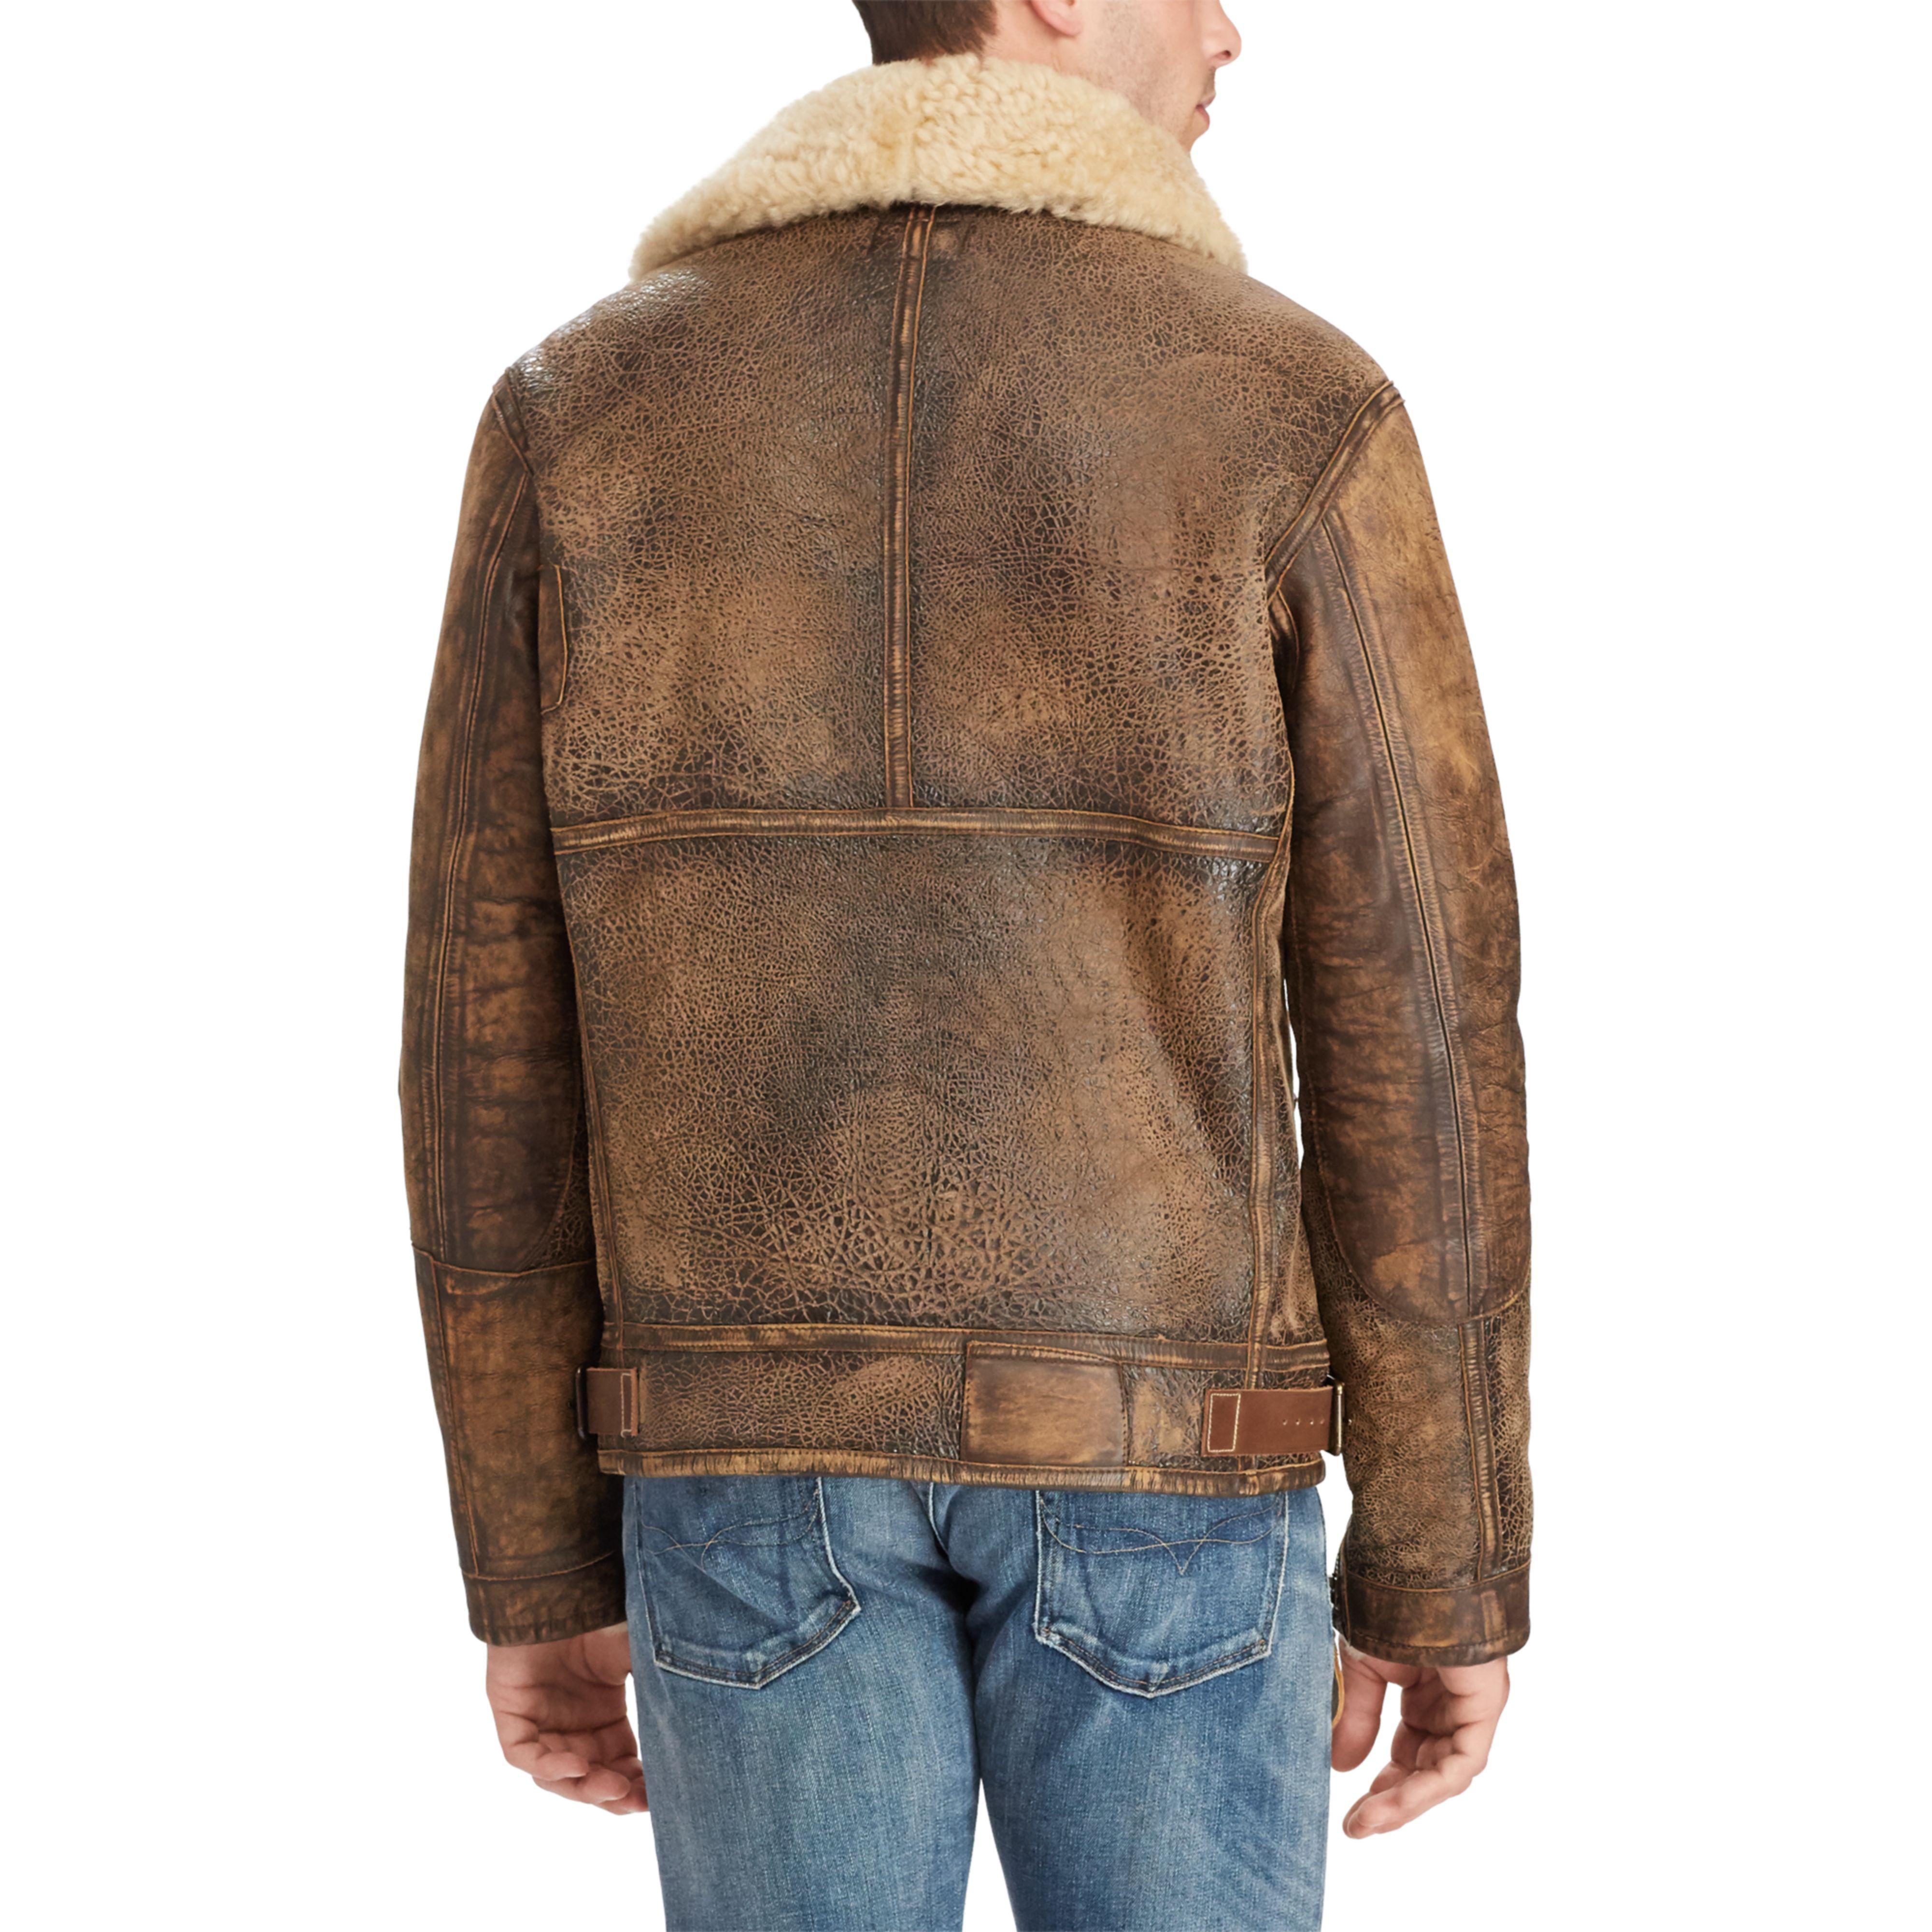 Polo Ralph Lauren Leather The Iconic Bomber Jacket for Men - Lyst